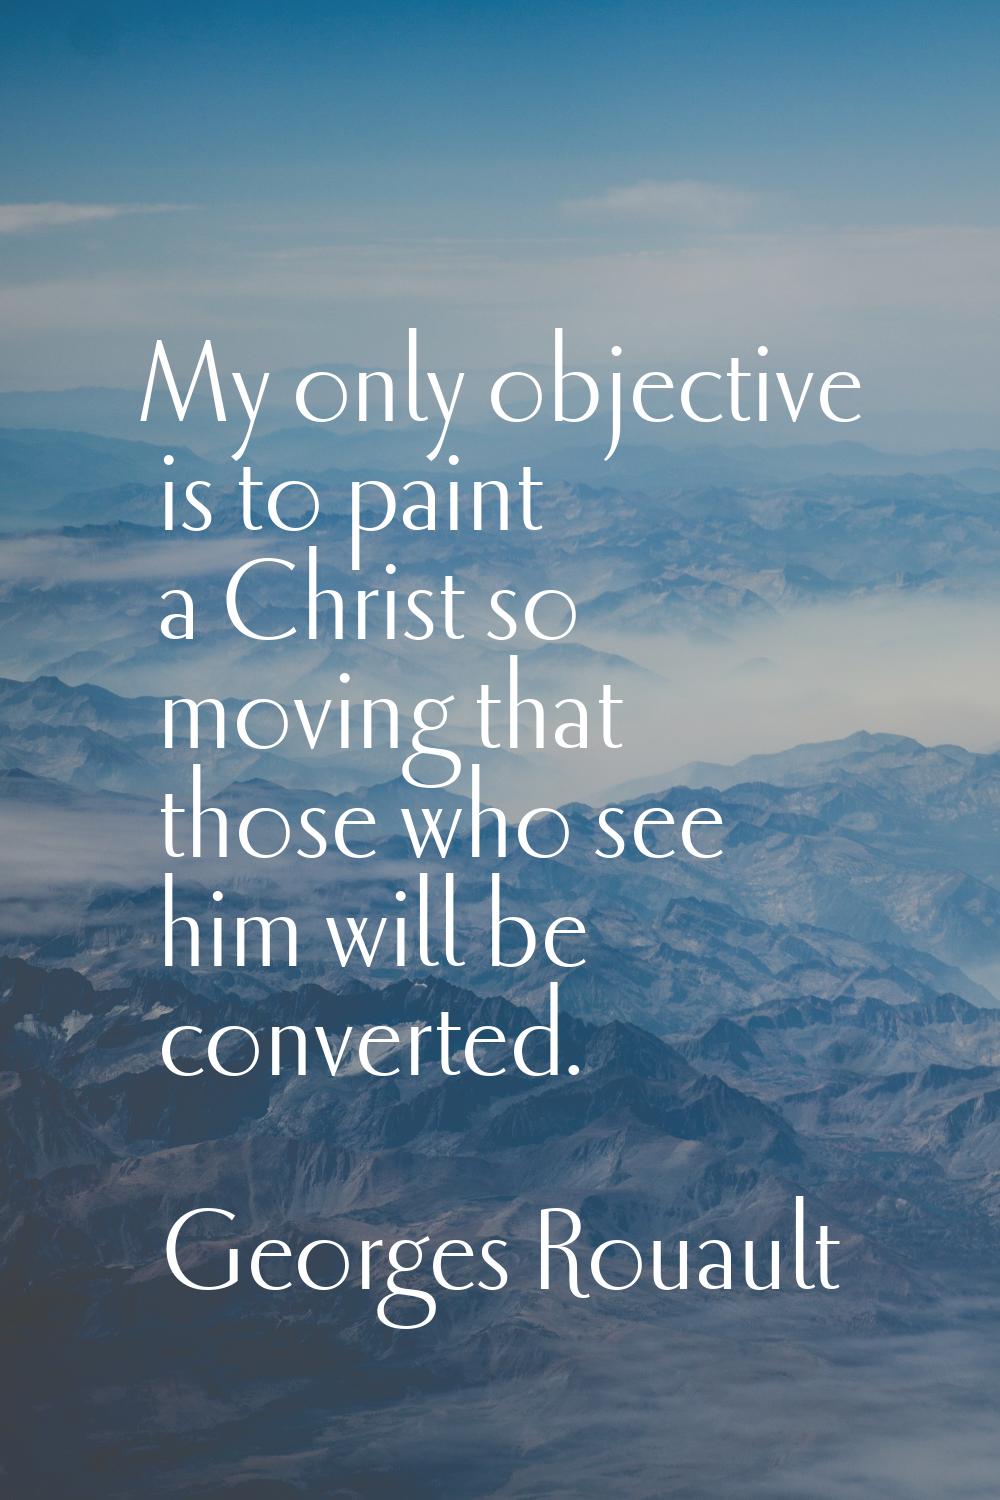 My only objective is to paint a Christ so moving that those who see him will be converted.